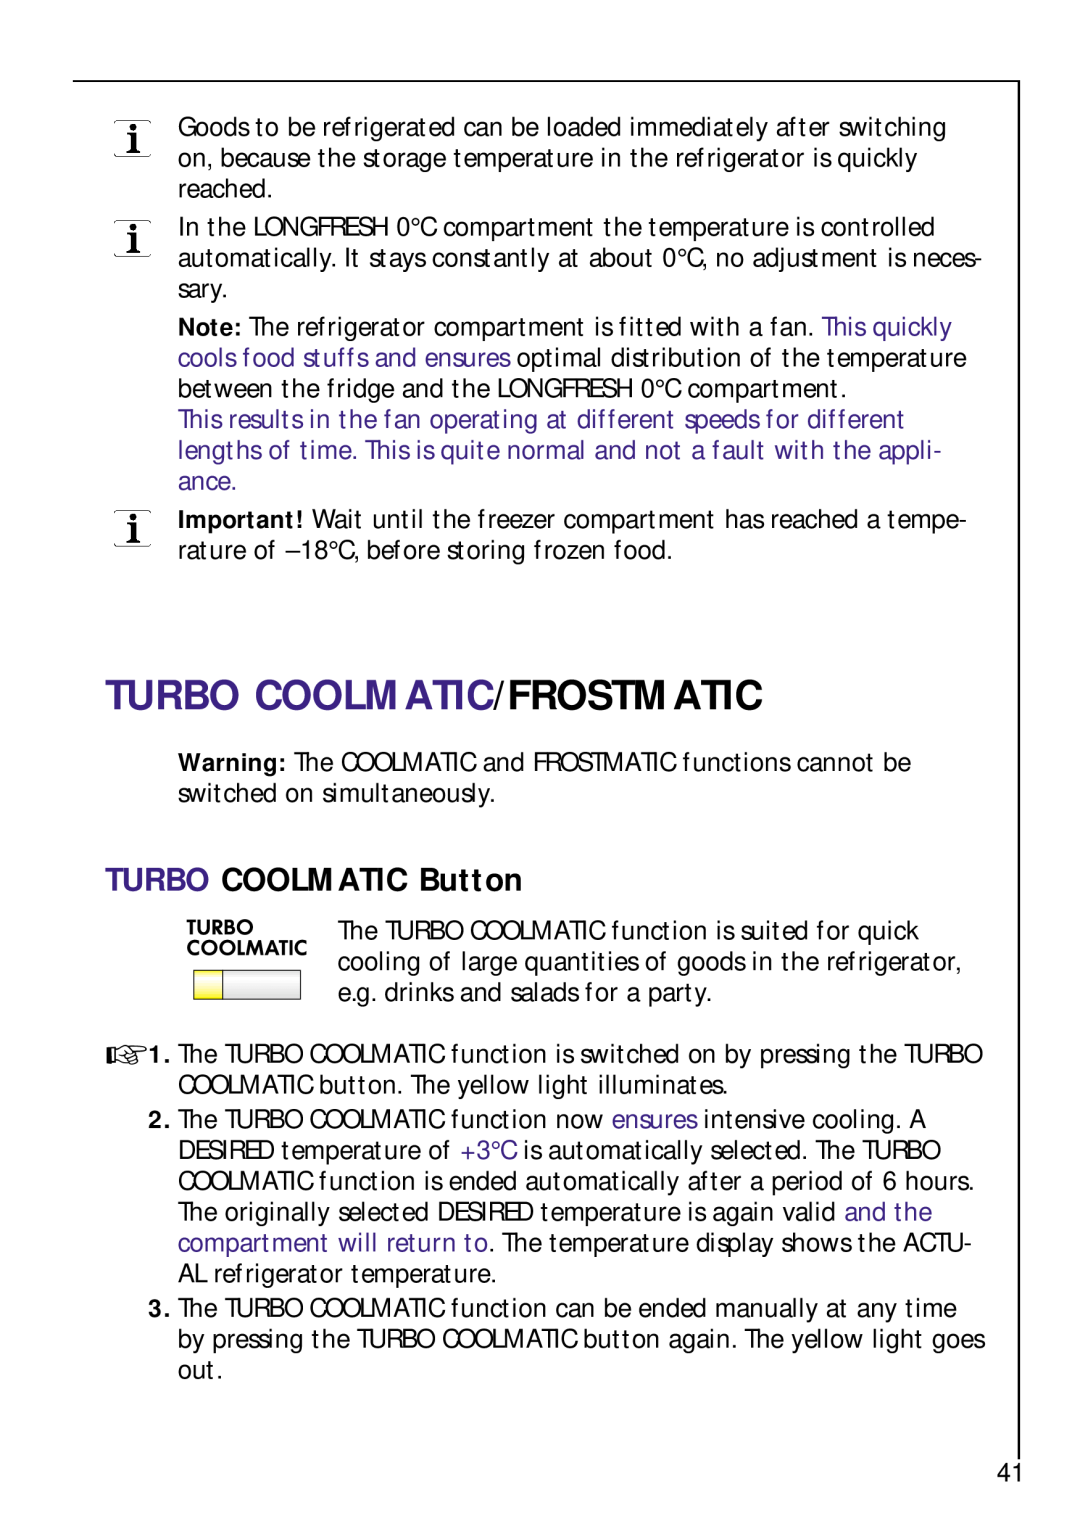 Electrolux Z 9 18 42-4 I user manual TURBO COOLMATIC Button, Turbo Coolmatic/Frostmatic 